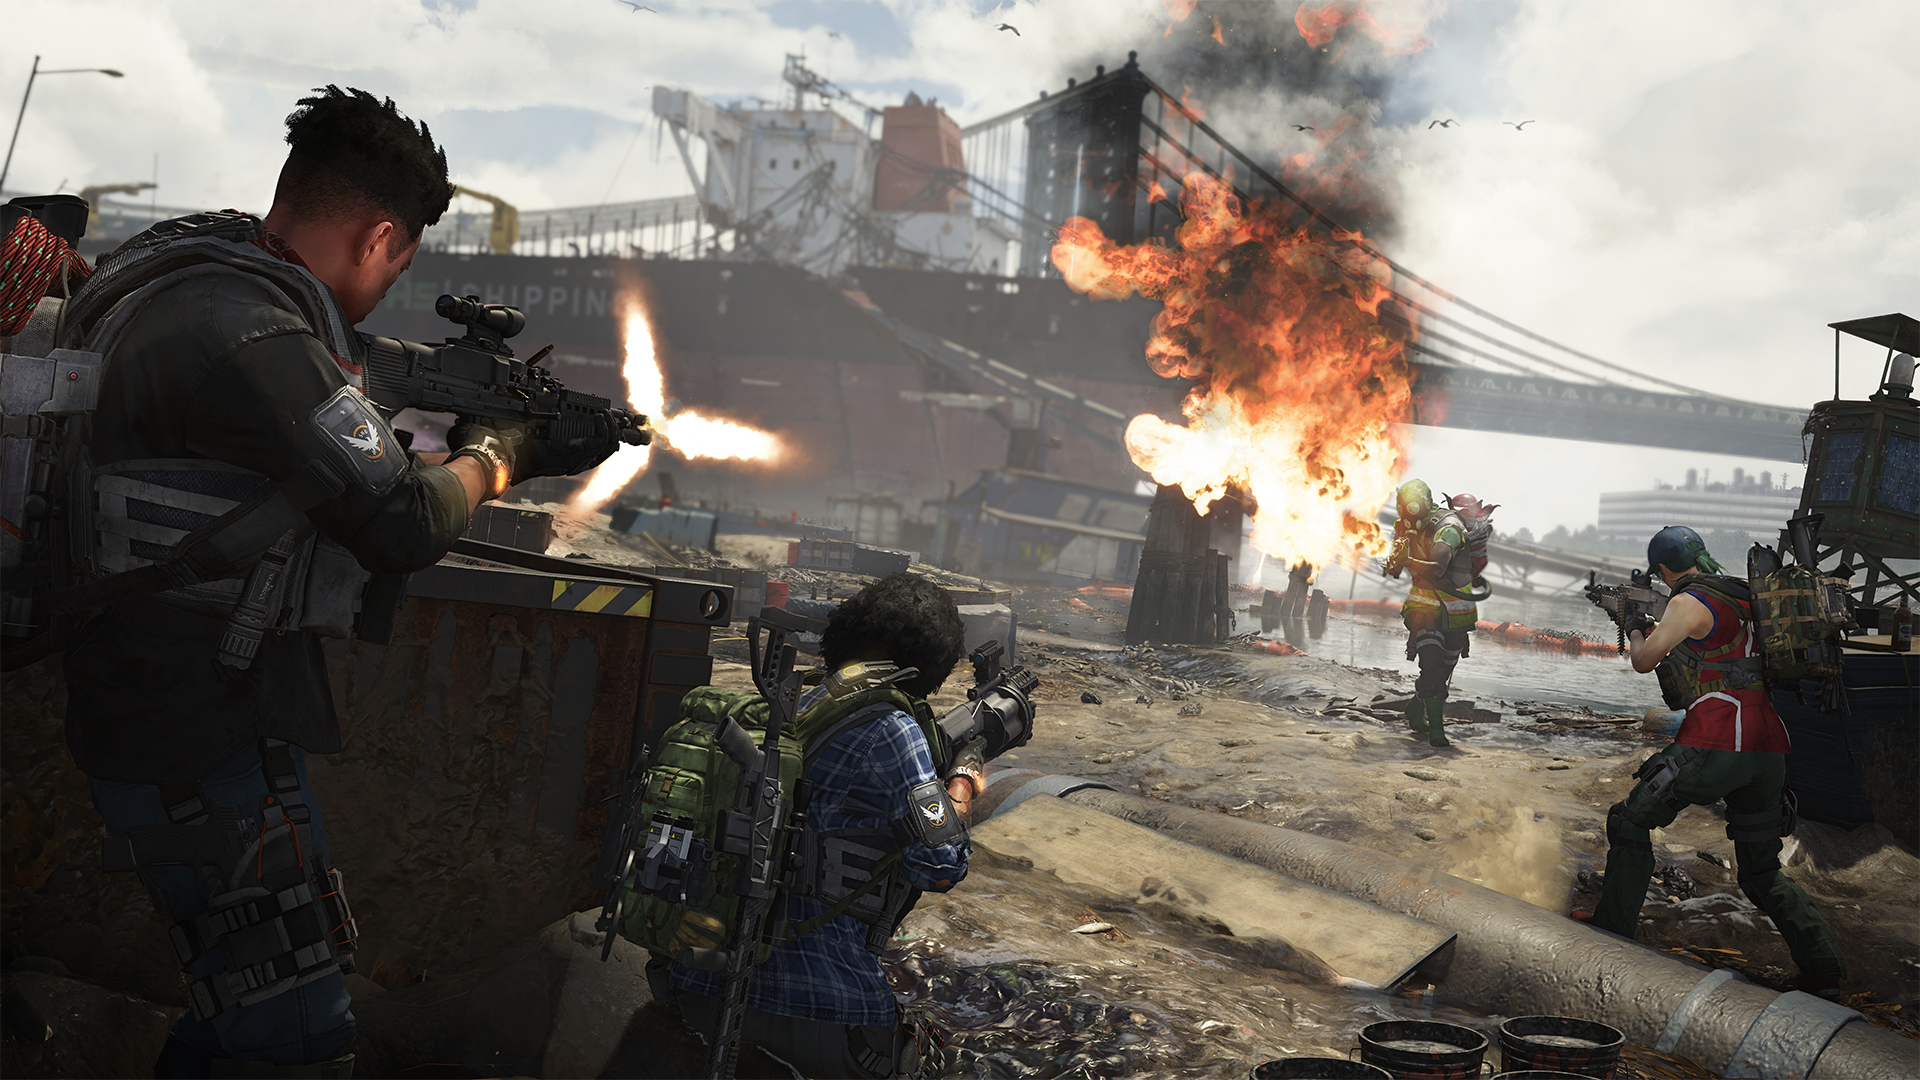 The Big Apple Bites Back: Hands-on with The Division 2 Warlords of New York